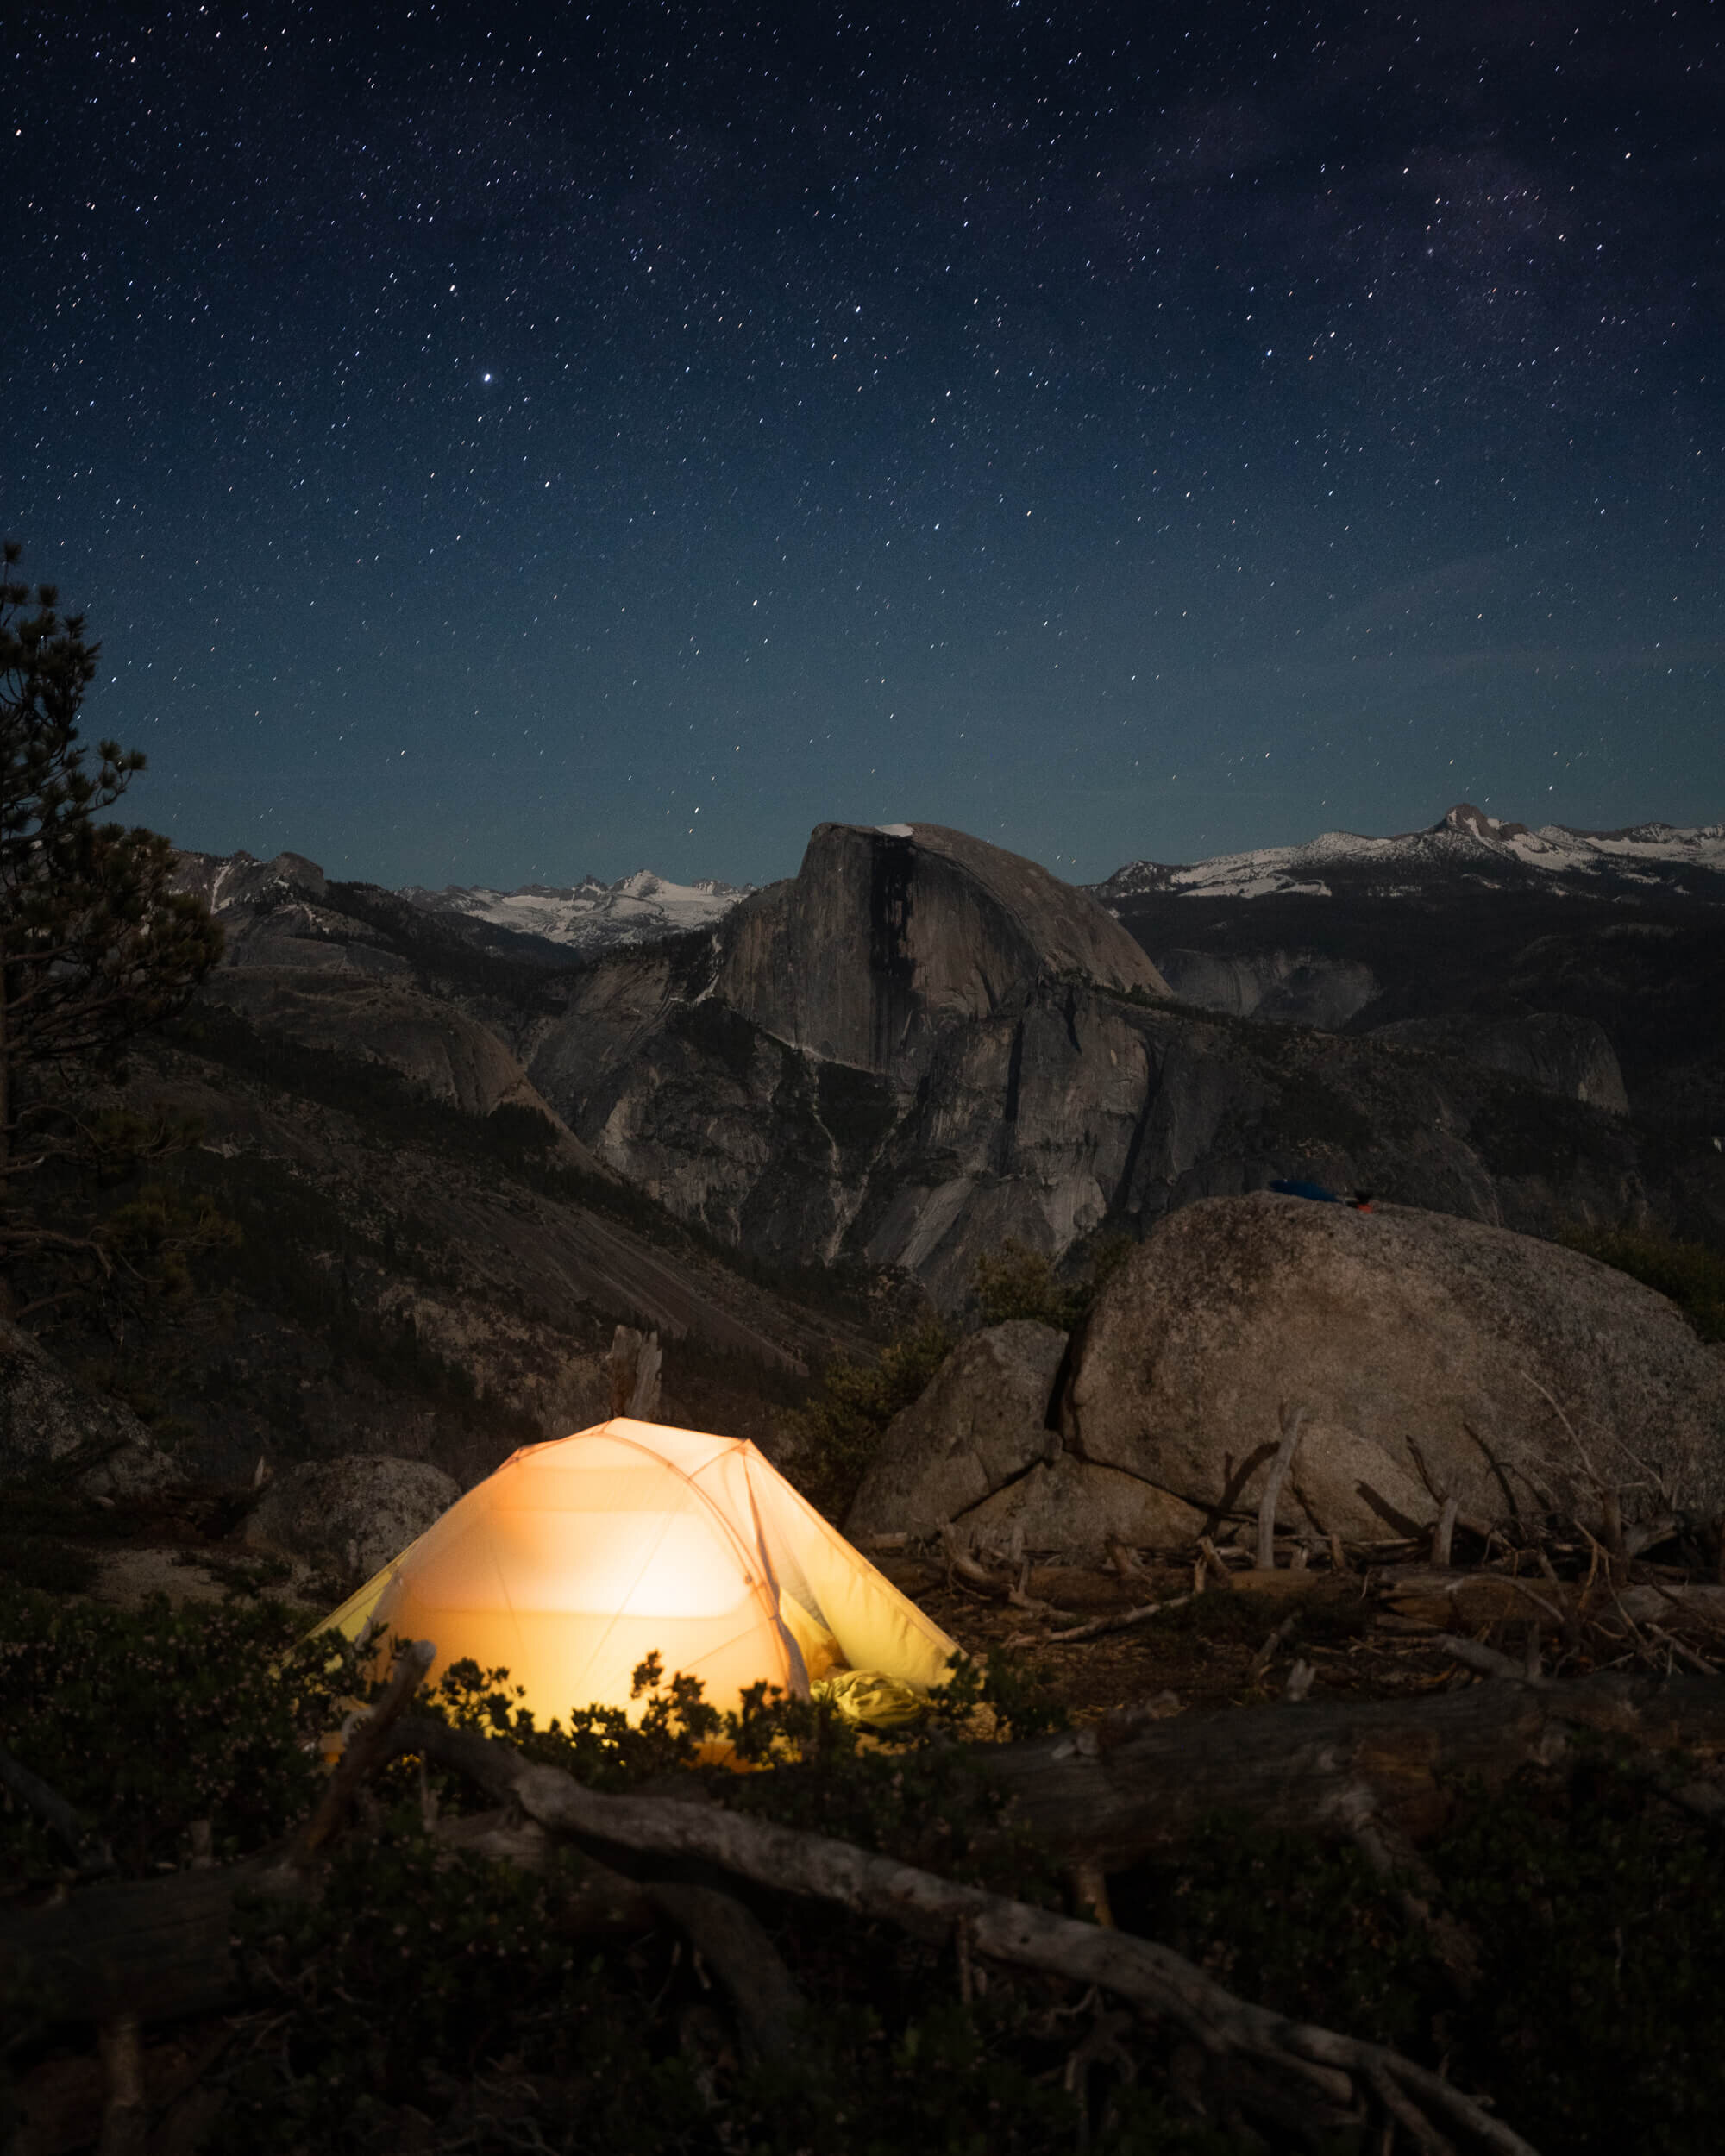 The photo was taken on a  backcountry camping trip in Yosemite National Park . Most tents have mesh pockets you can place your headlamp in for light at night. Alternatively pick up a small  tent lantern  for some nice ambient light. Shown: Big Agnes  2 Person Tent .